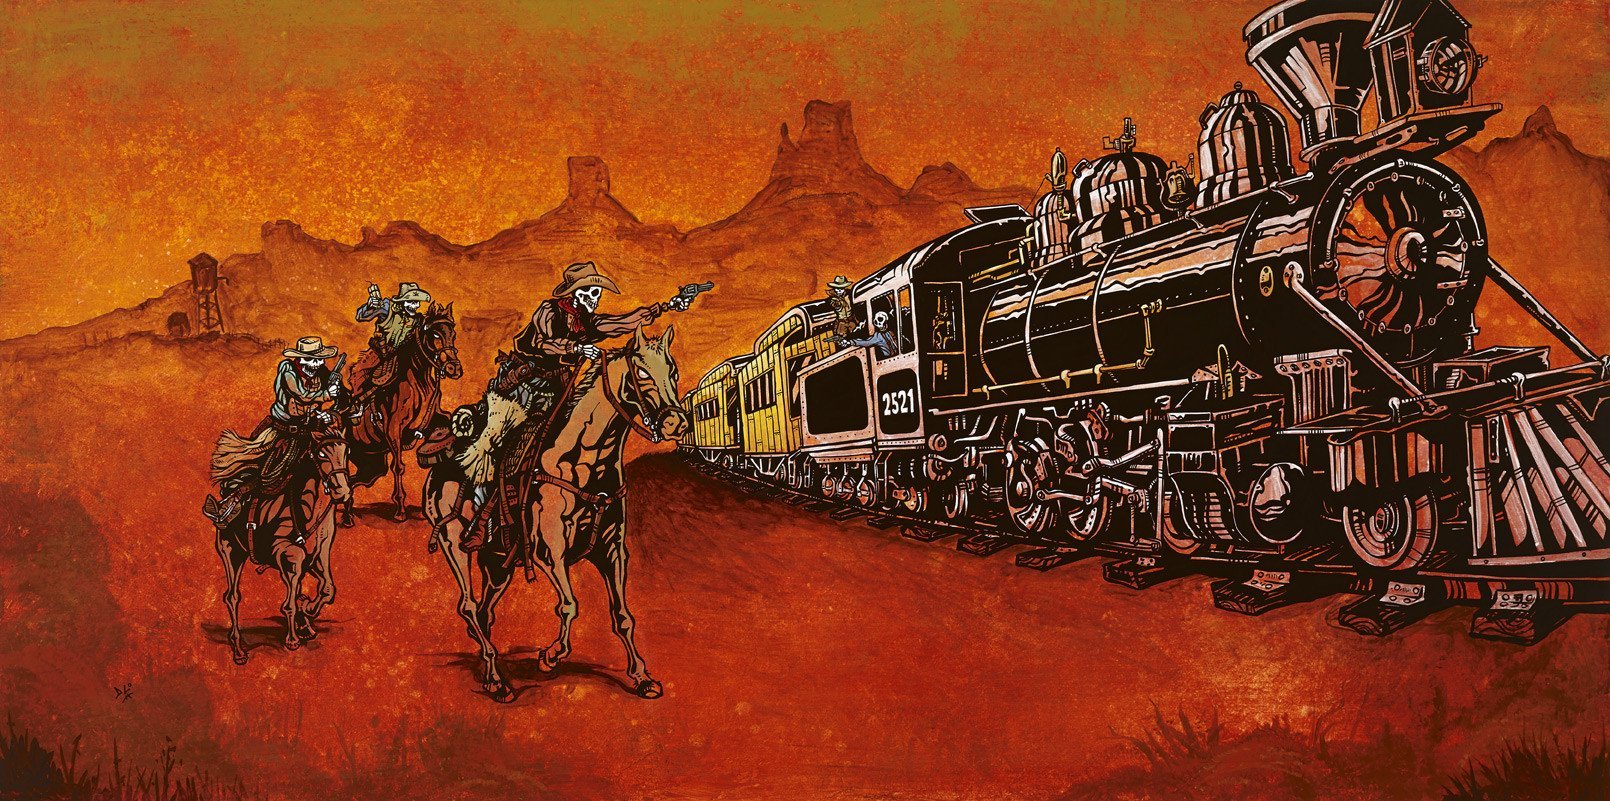 Big Iron by Day of the Dead Artist David Lozeau, Day of the Dead Art, Dia de los Muertos Art, Dia de los Muertos Artist